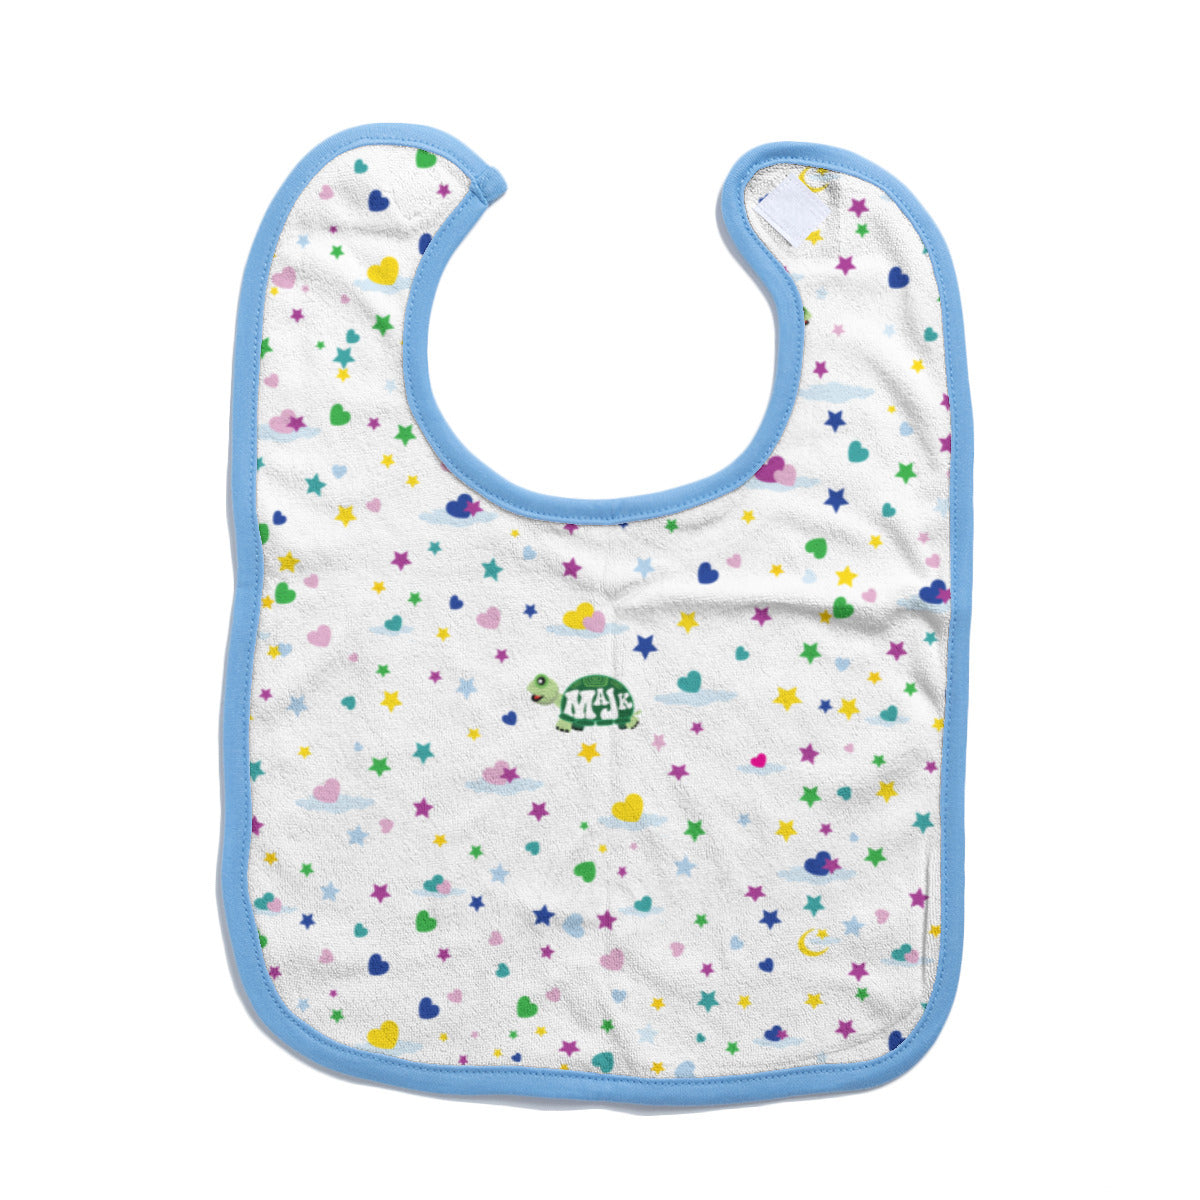 Cotton Baby Bib/Drooling Towel  "Sweet Dreams Little One" (White)